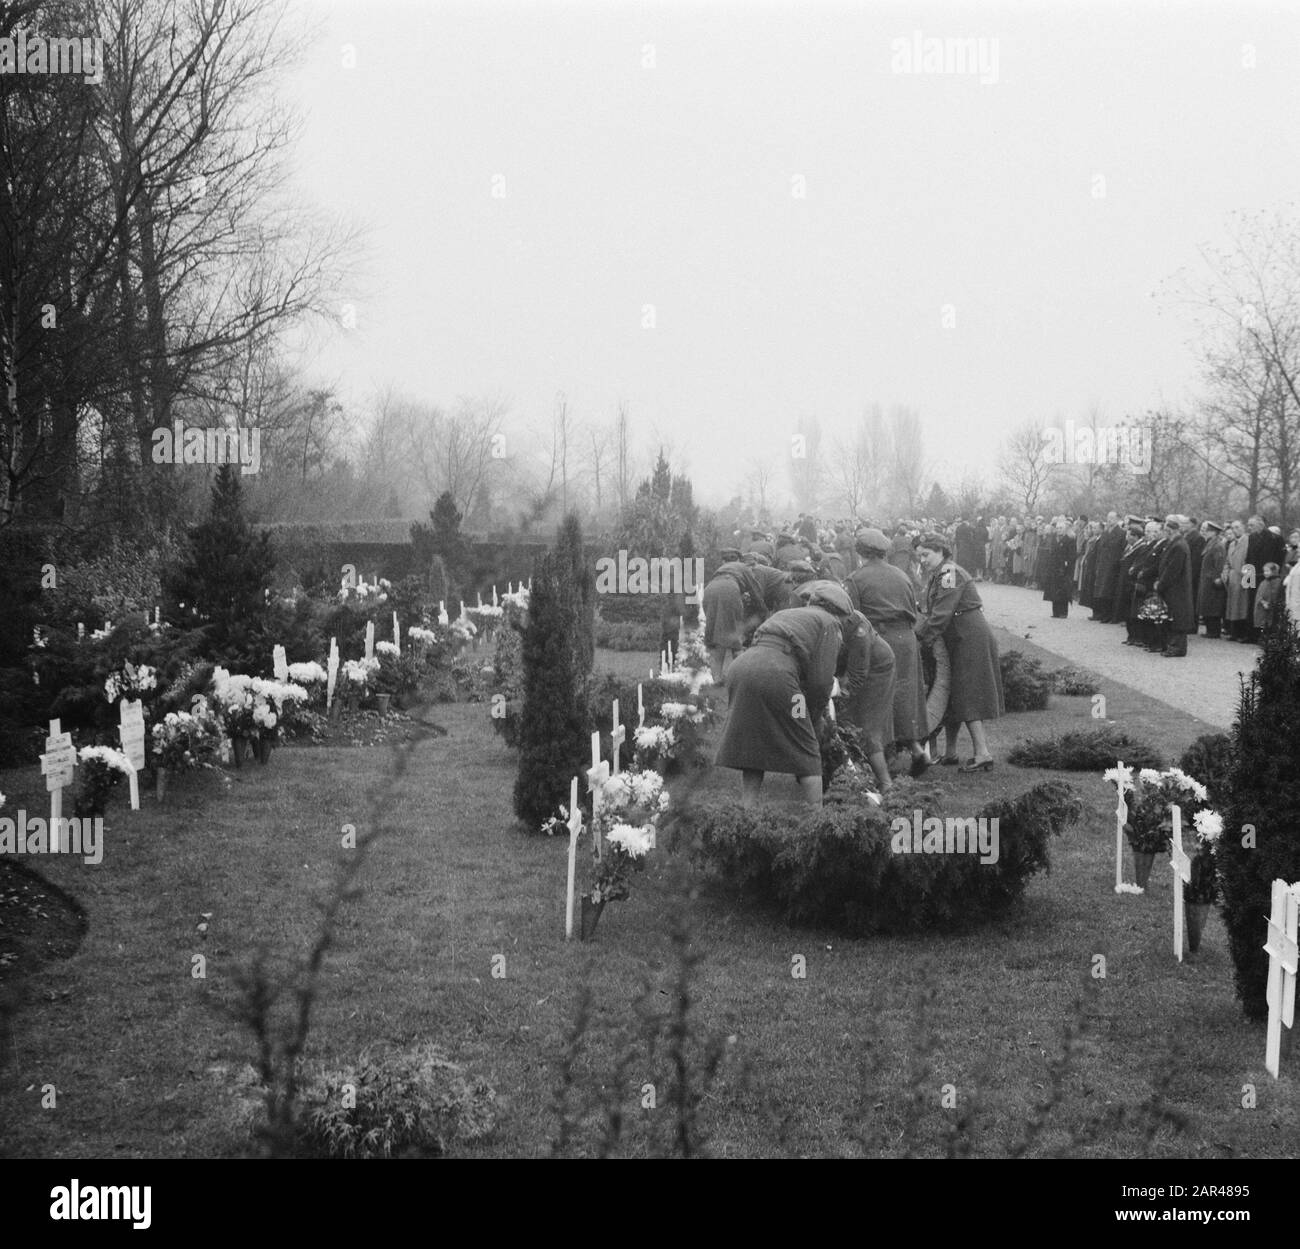 Commemoration war tombs New Eastern Cemetery Annotation: Women in uniform (Milva's or Red Cross?) Places wreaths Date: November 15, 1952 Location: Amsterdam Keywords: commemorations, war graves Institution name: Oostercemetery Stock Photo